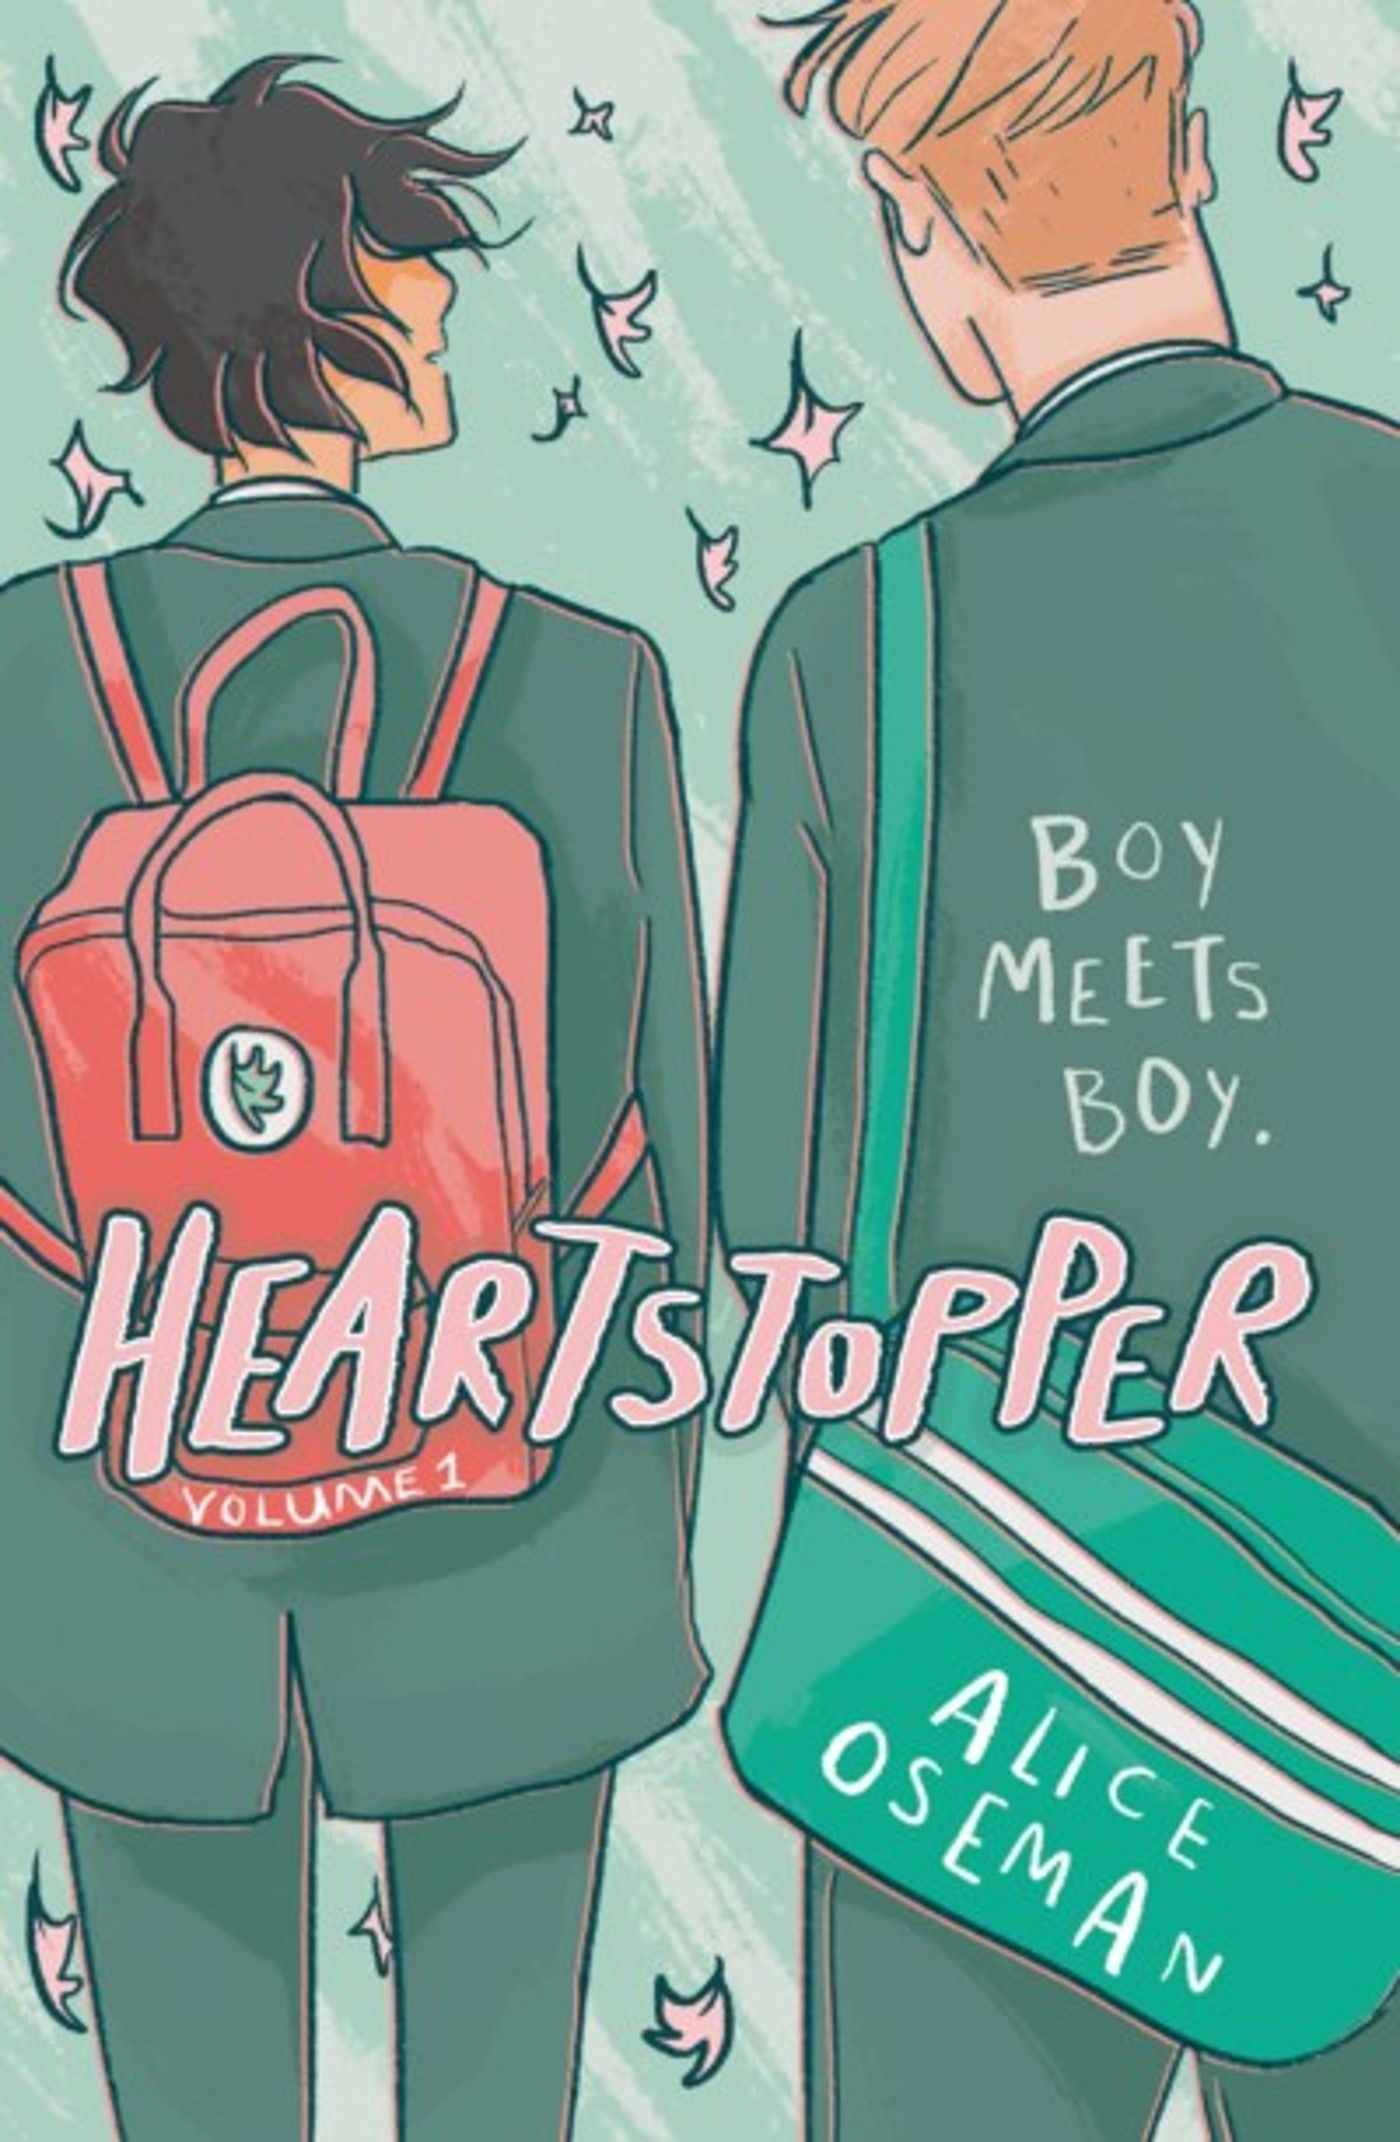 Cover of Heartstopper Volume 1 Featuring Nick and Charlie